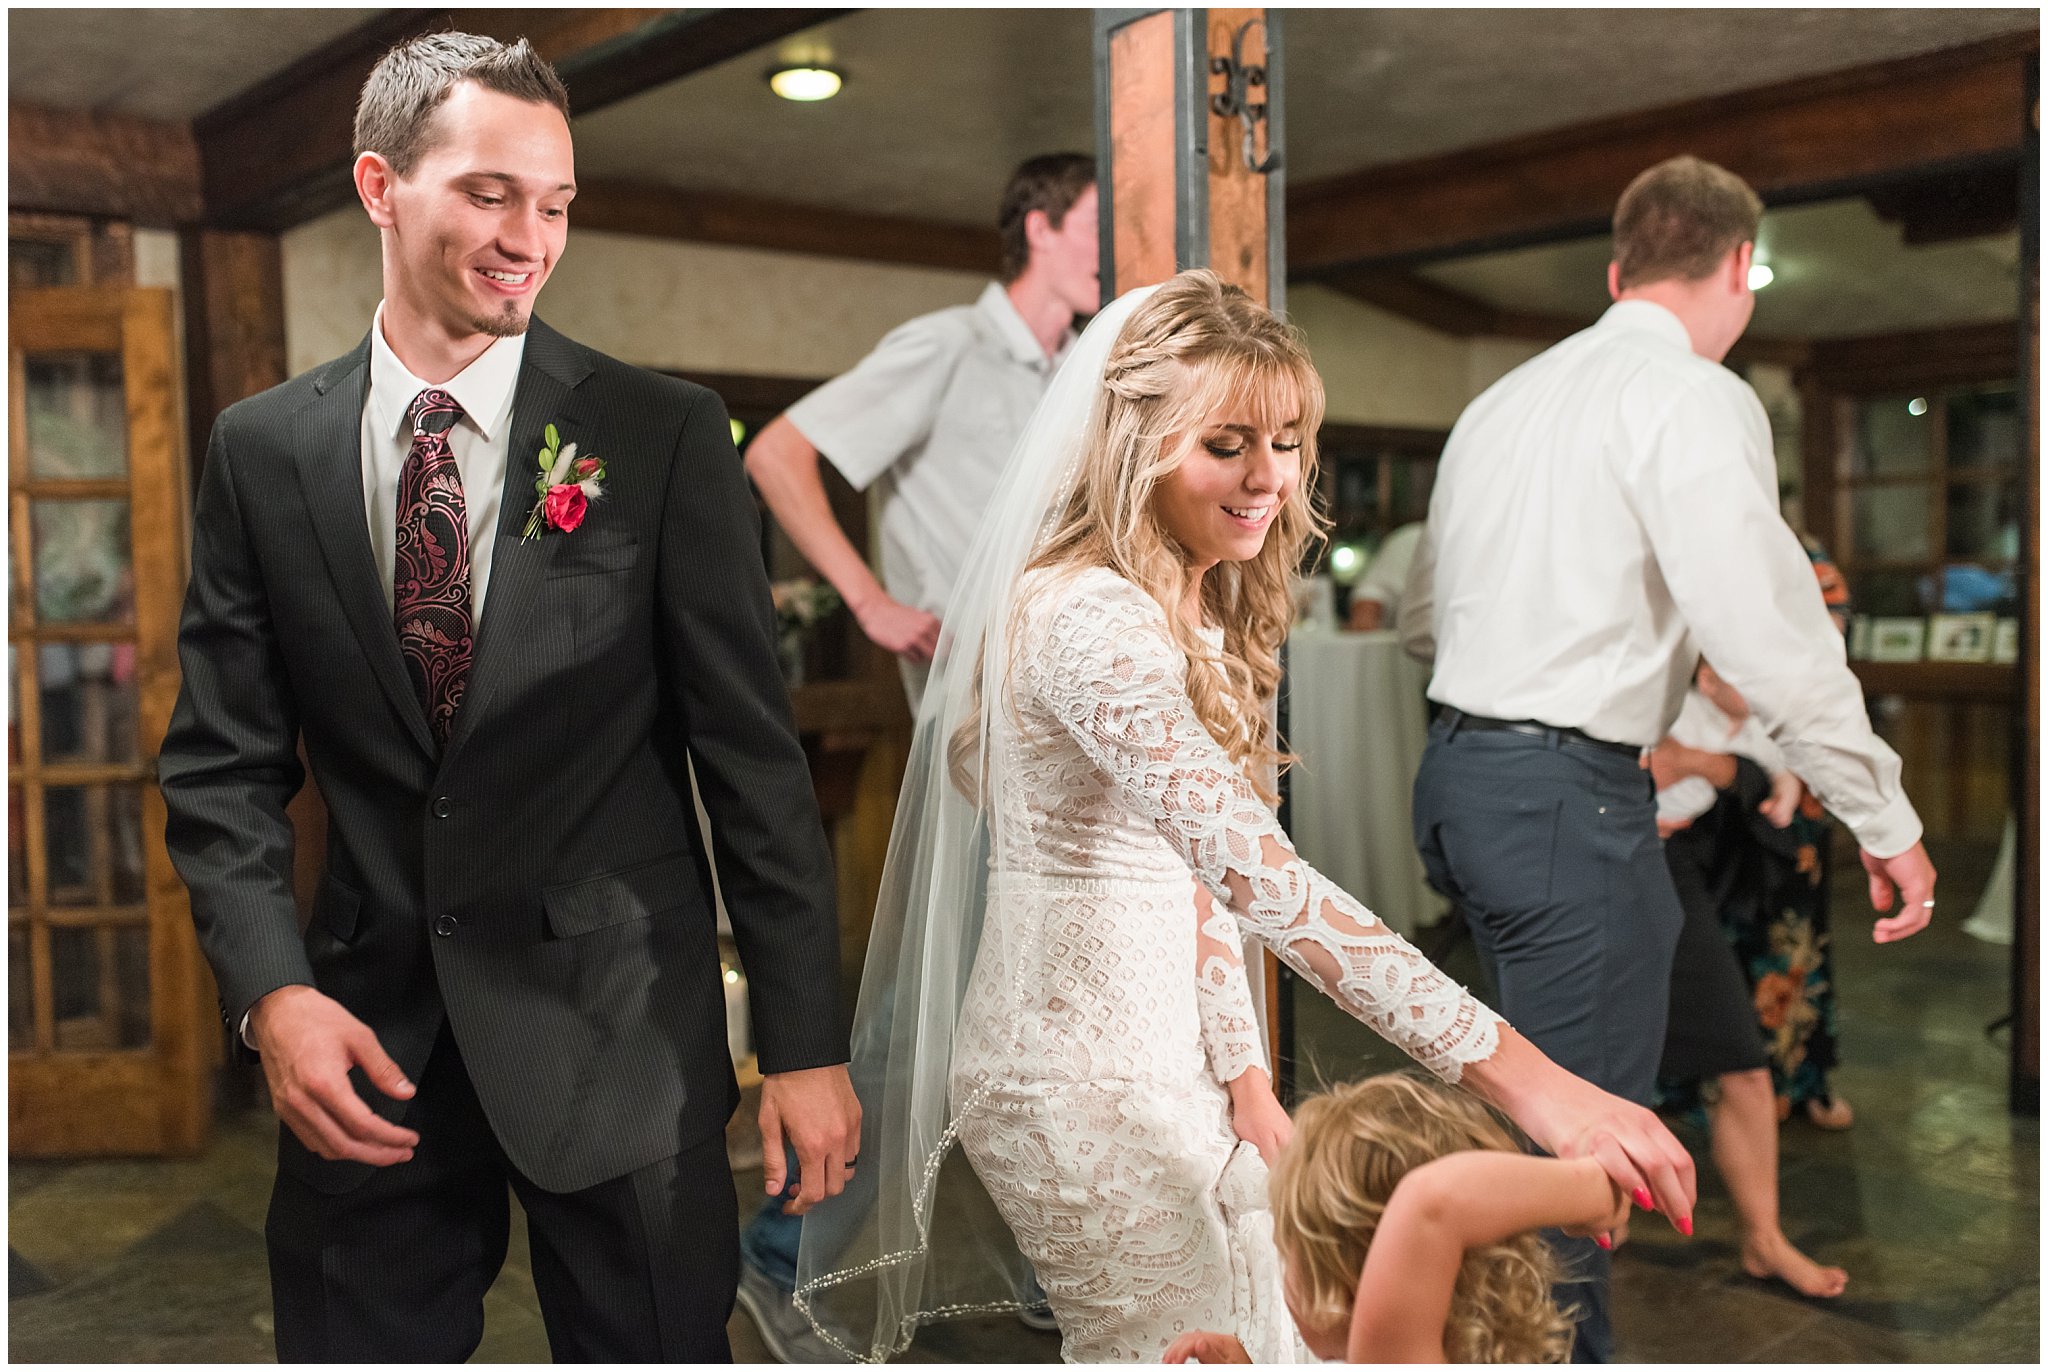 Party dancing during reception in the barn | Wadley Farms Summer Wedding | Jessie and Dallin Photography